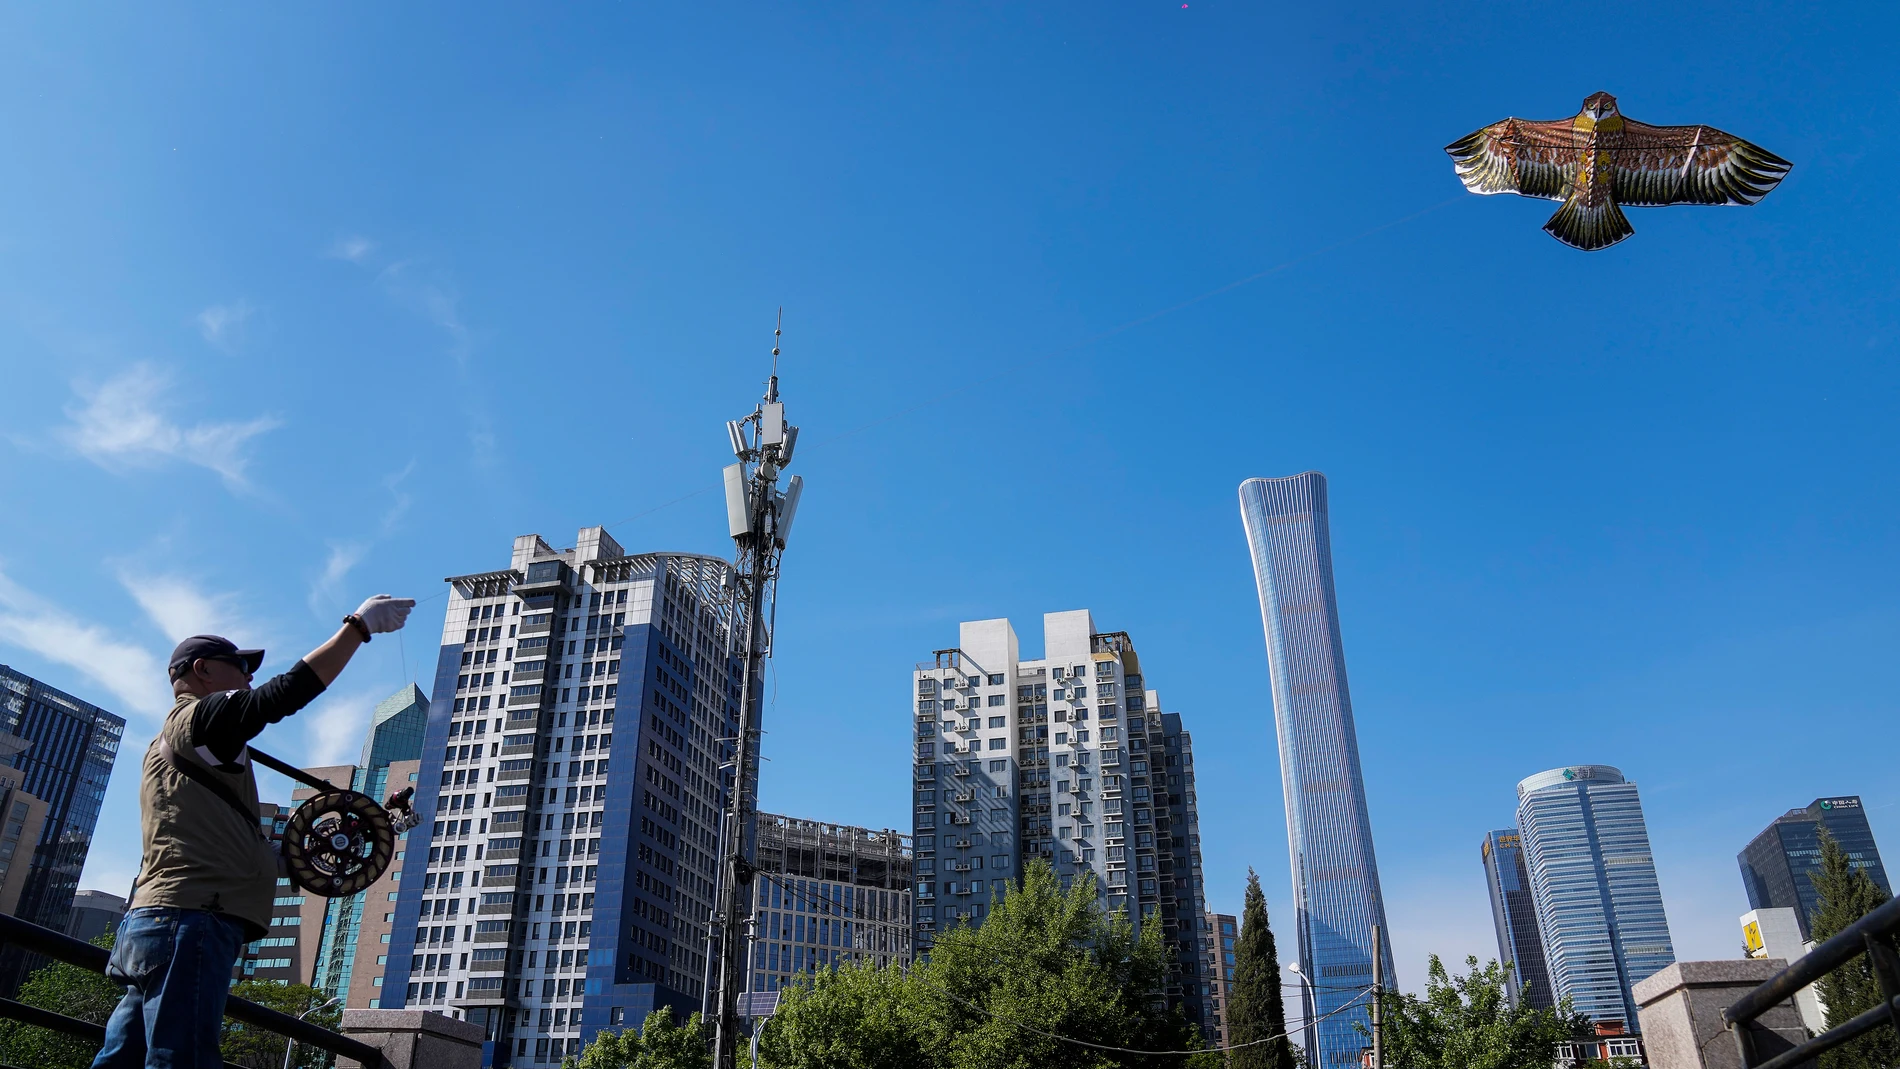 A man flies a kite at a public park against the capital city tallest skyscraper China Zun Tower and office buildings in the central business district in Beijing, Tuesday, April 18, 2023. China's economic growth accelerated in the latest quarter as consumer flocked back to shops and restaurants following the abrupt end of anti-virus controls. (AP Photo/Andy Wong)